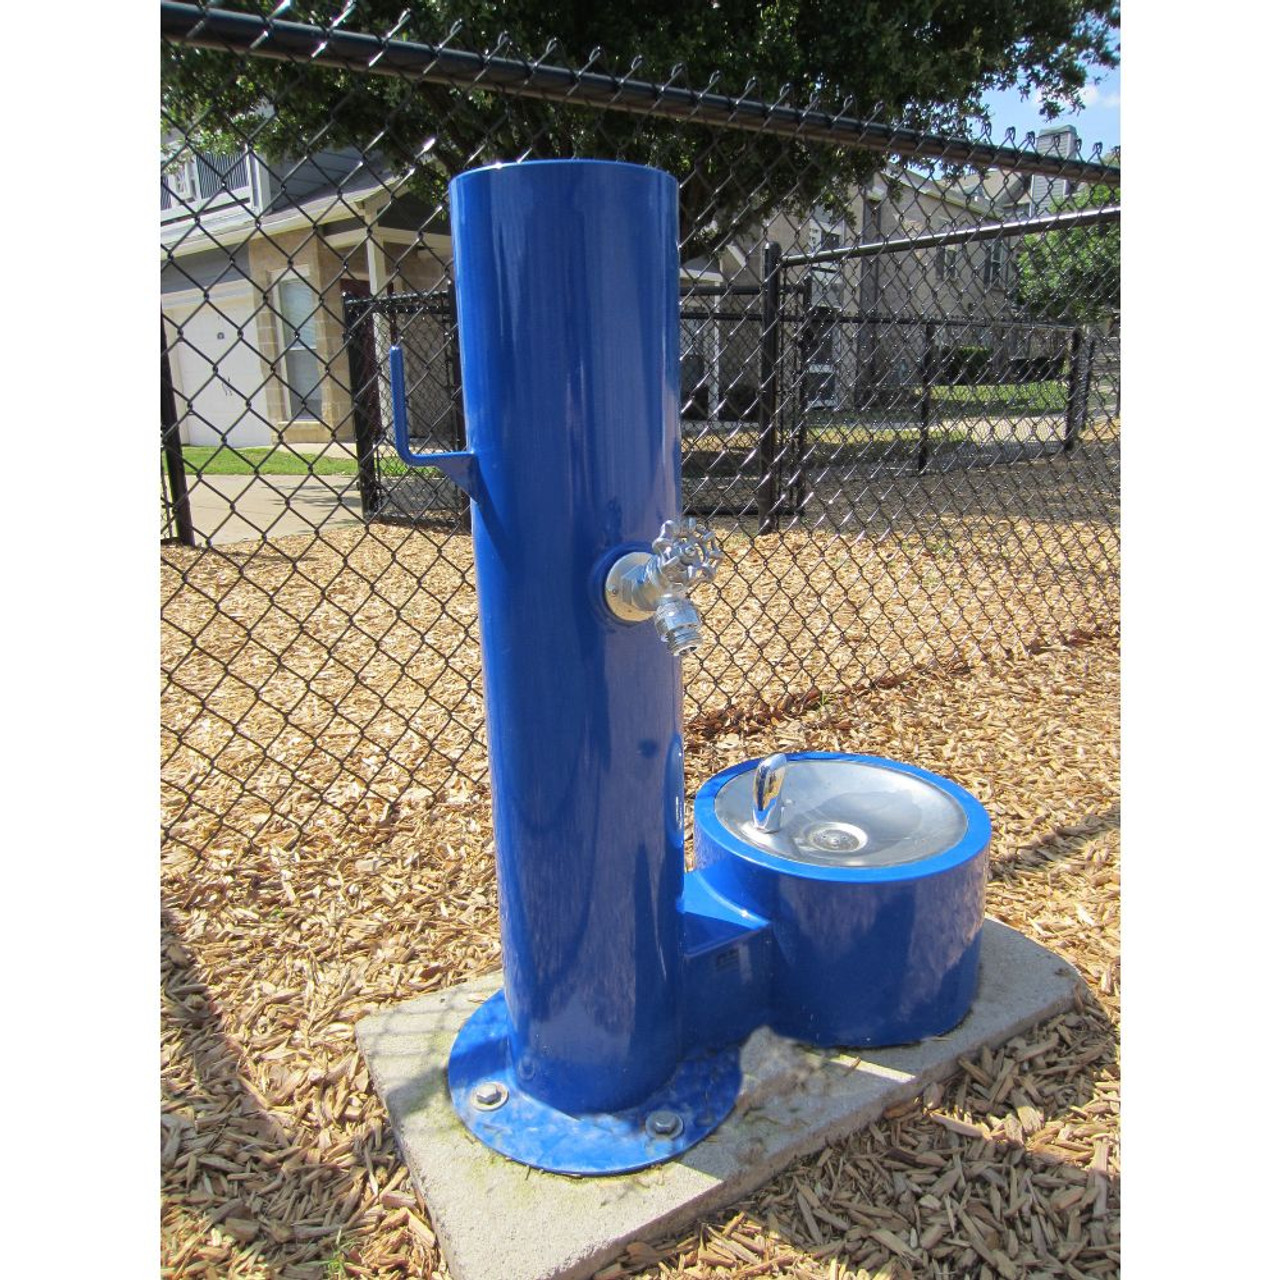 Deluxe Dog Watering Station - blue